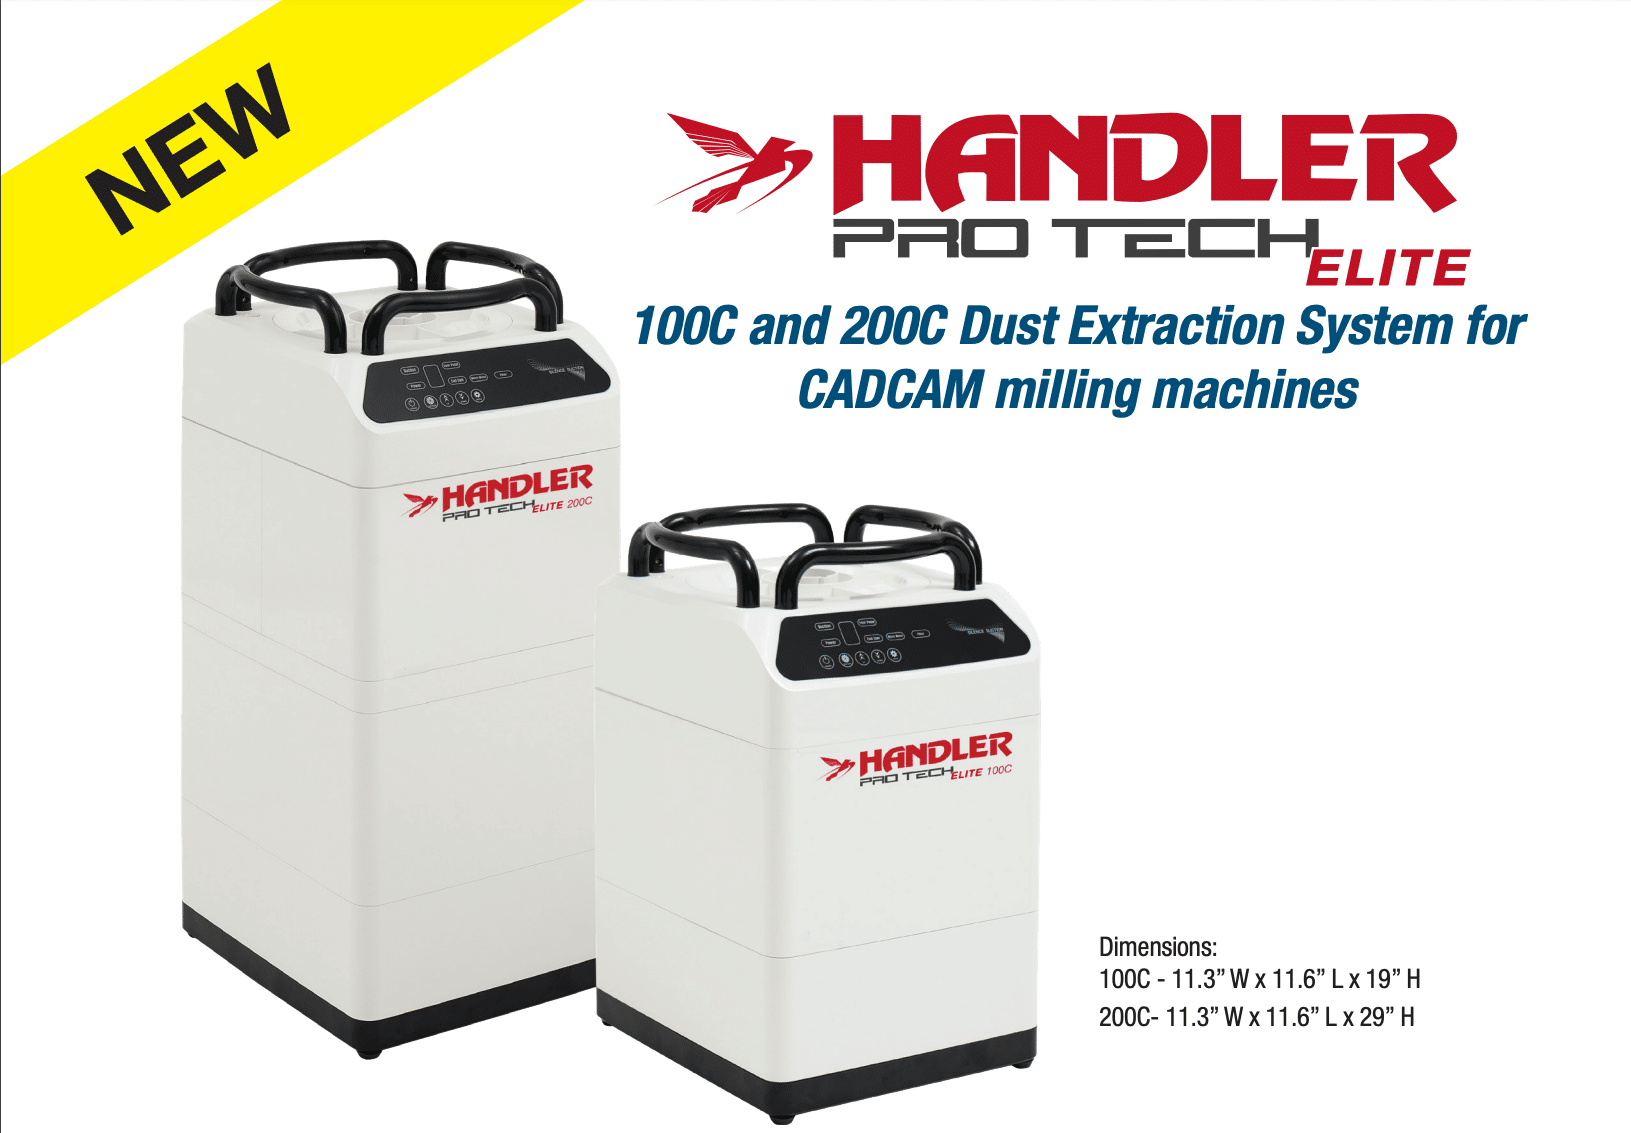 Handler - 100C and 200C Dust Extraction System for CADCAM Milling Machines